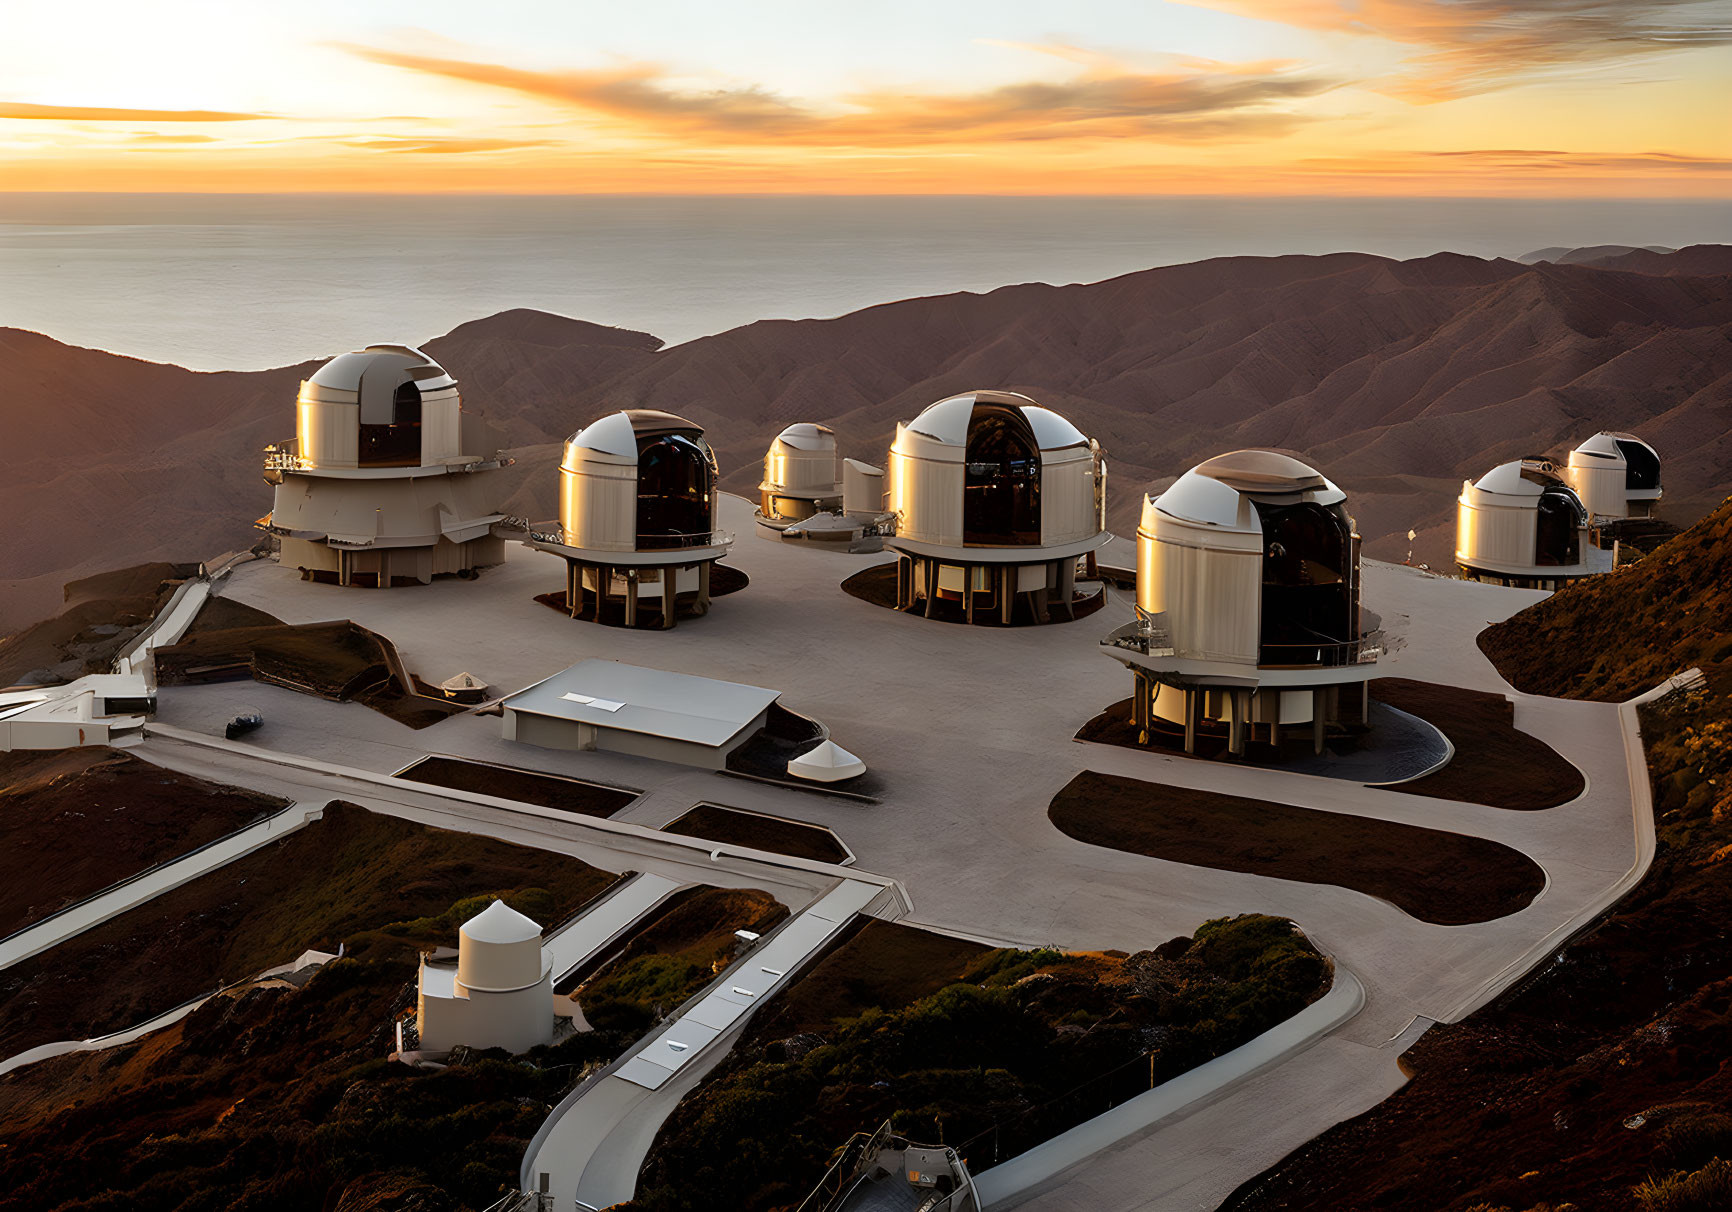 Mountain-top observatory with dome telescopes, sunset, winding road, sea view